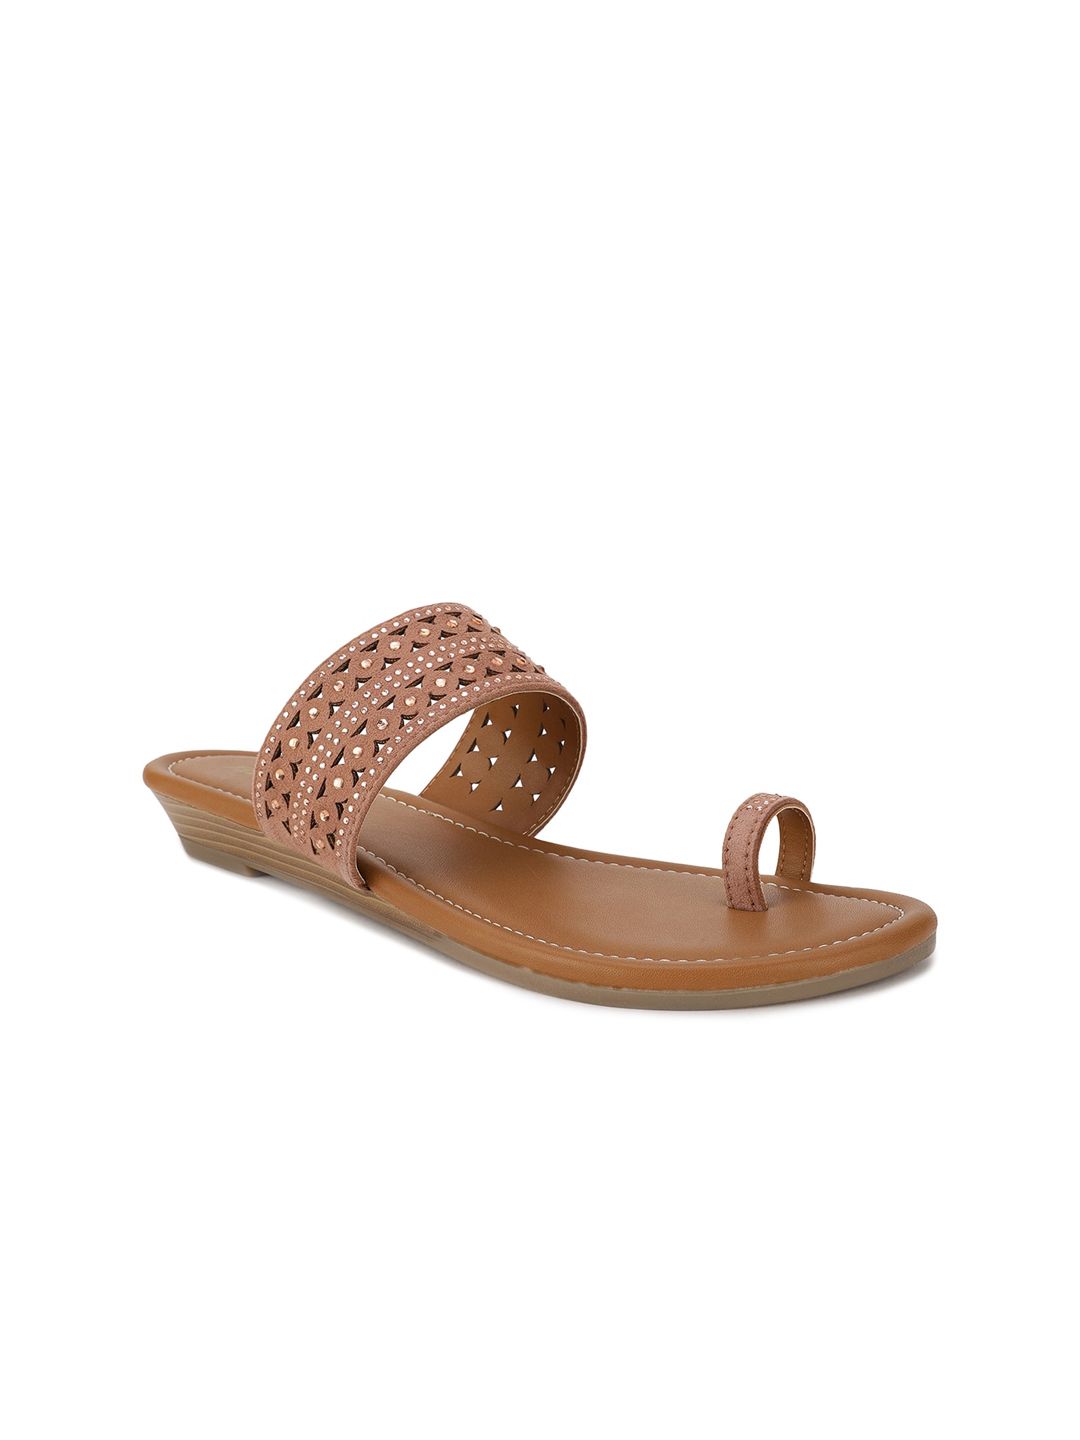 Bata Women Camel Brown Textured One Toe Flats with Laser Cuts Price in India